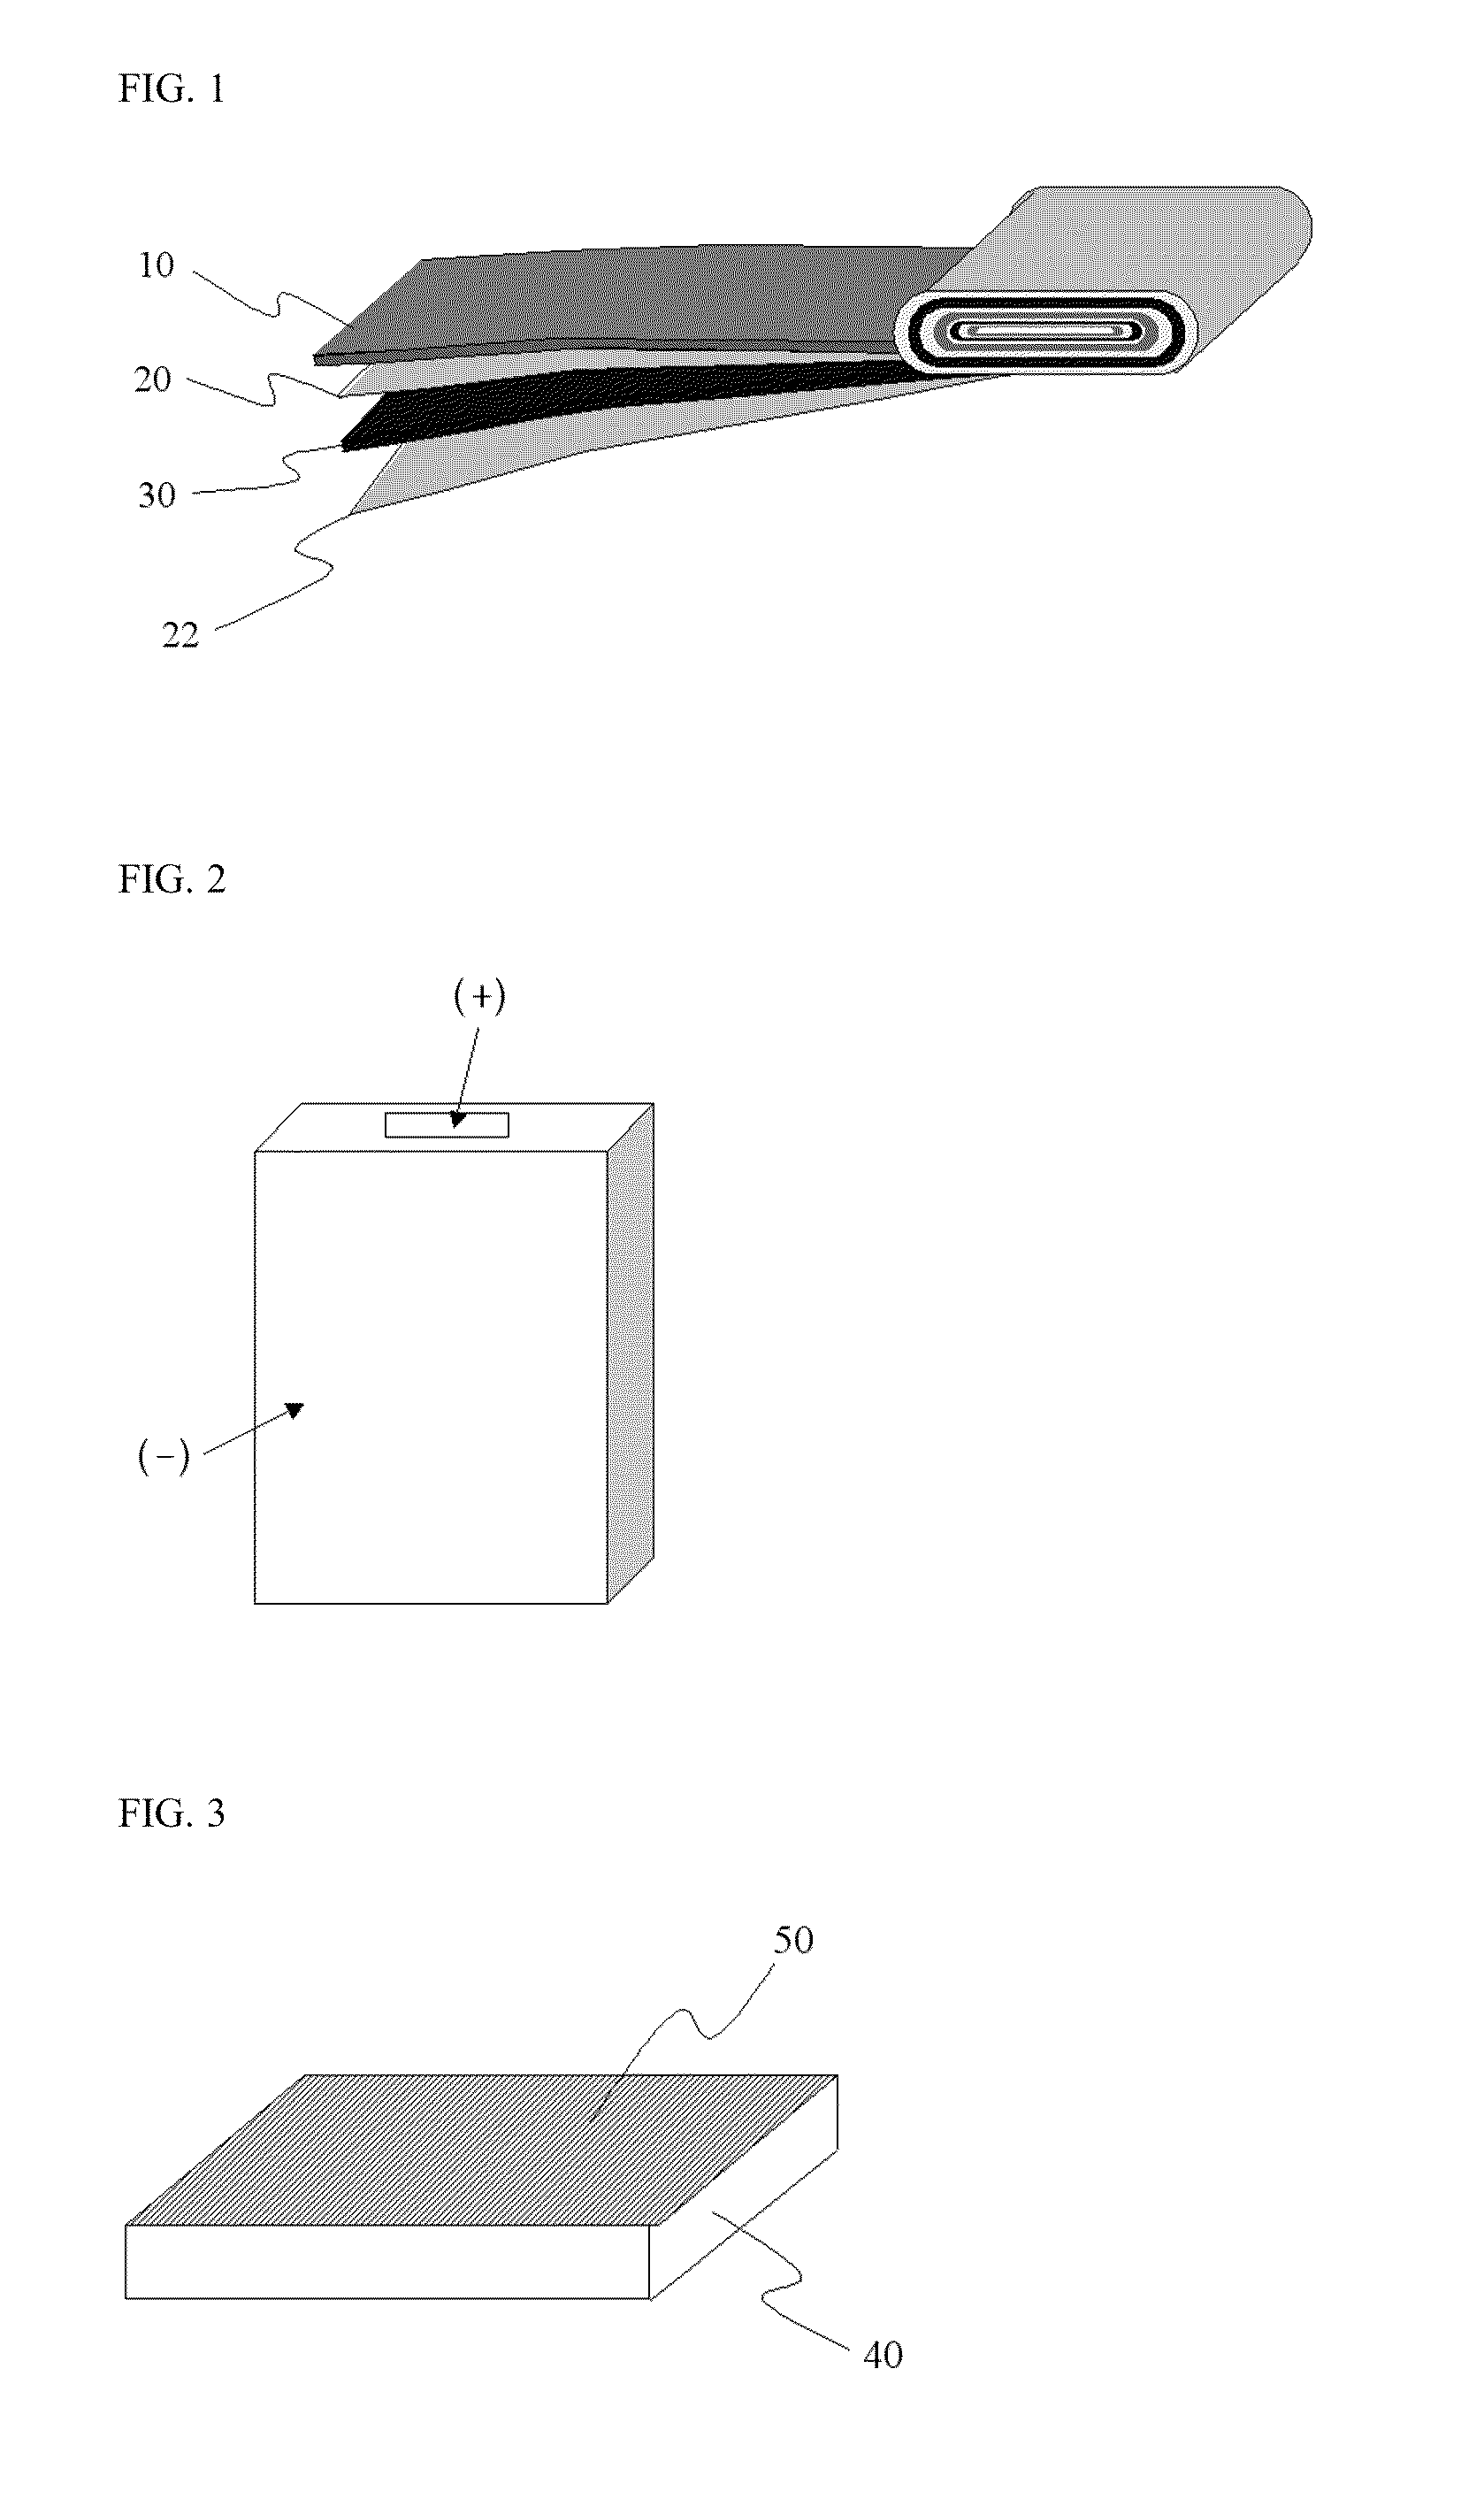 Battery system containing phase change material-containing capsules in interior configuration thereof